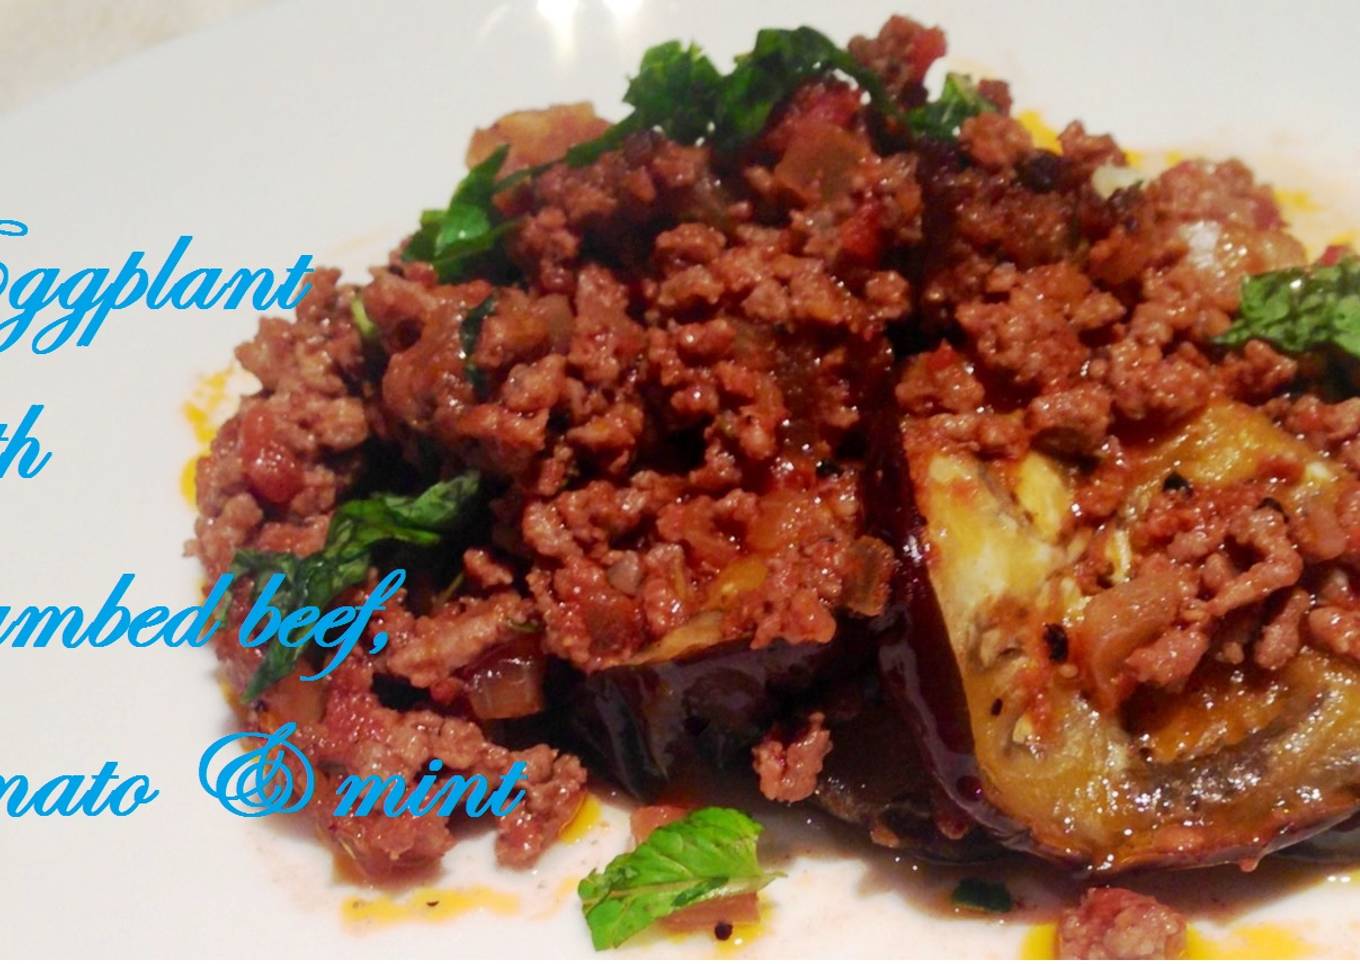 Eggplant with crumbed beef, tomato and mint